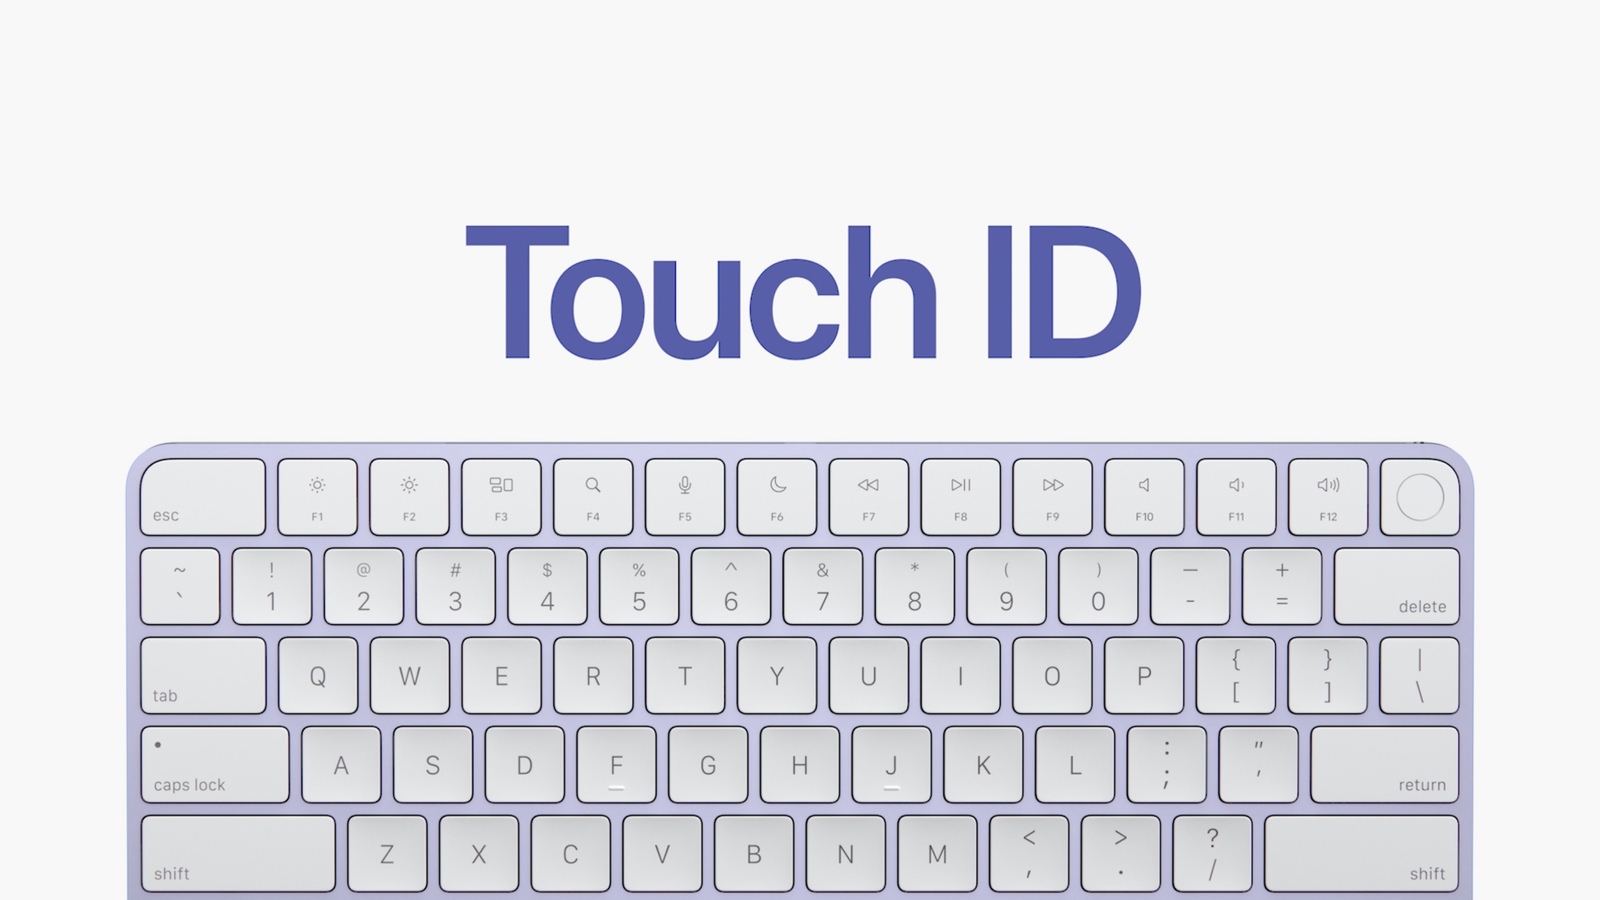 New M1 iMac Accessories Include Magic Keyboard With Touch ID and